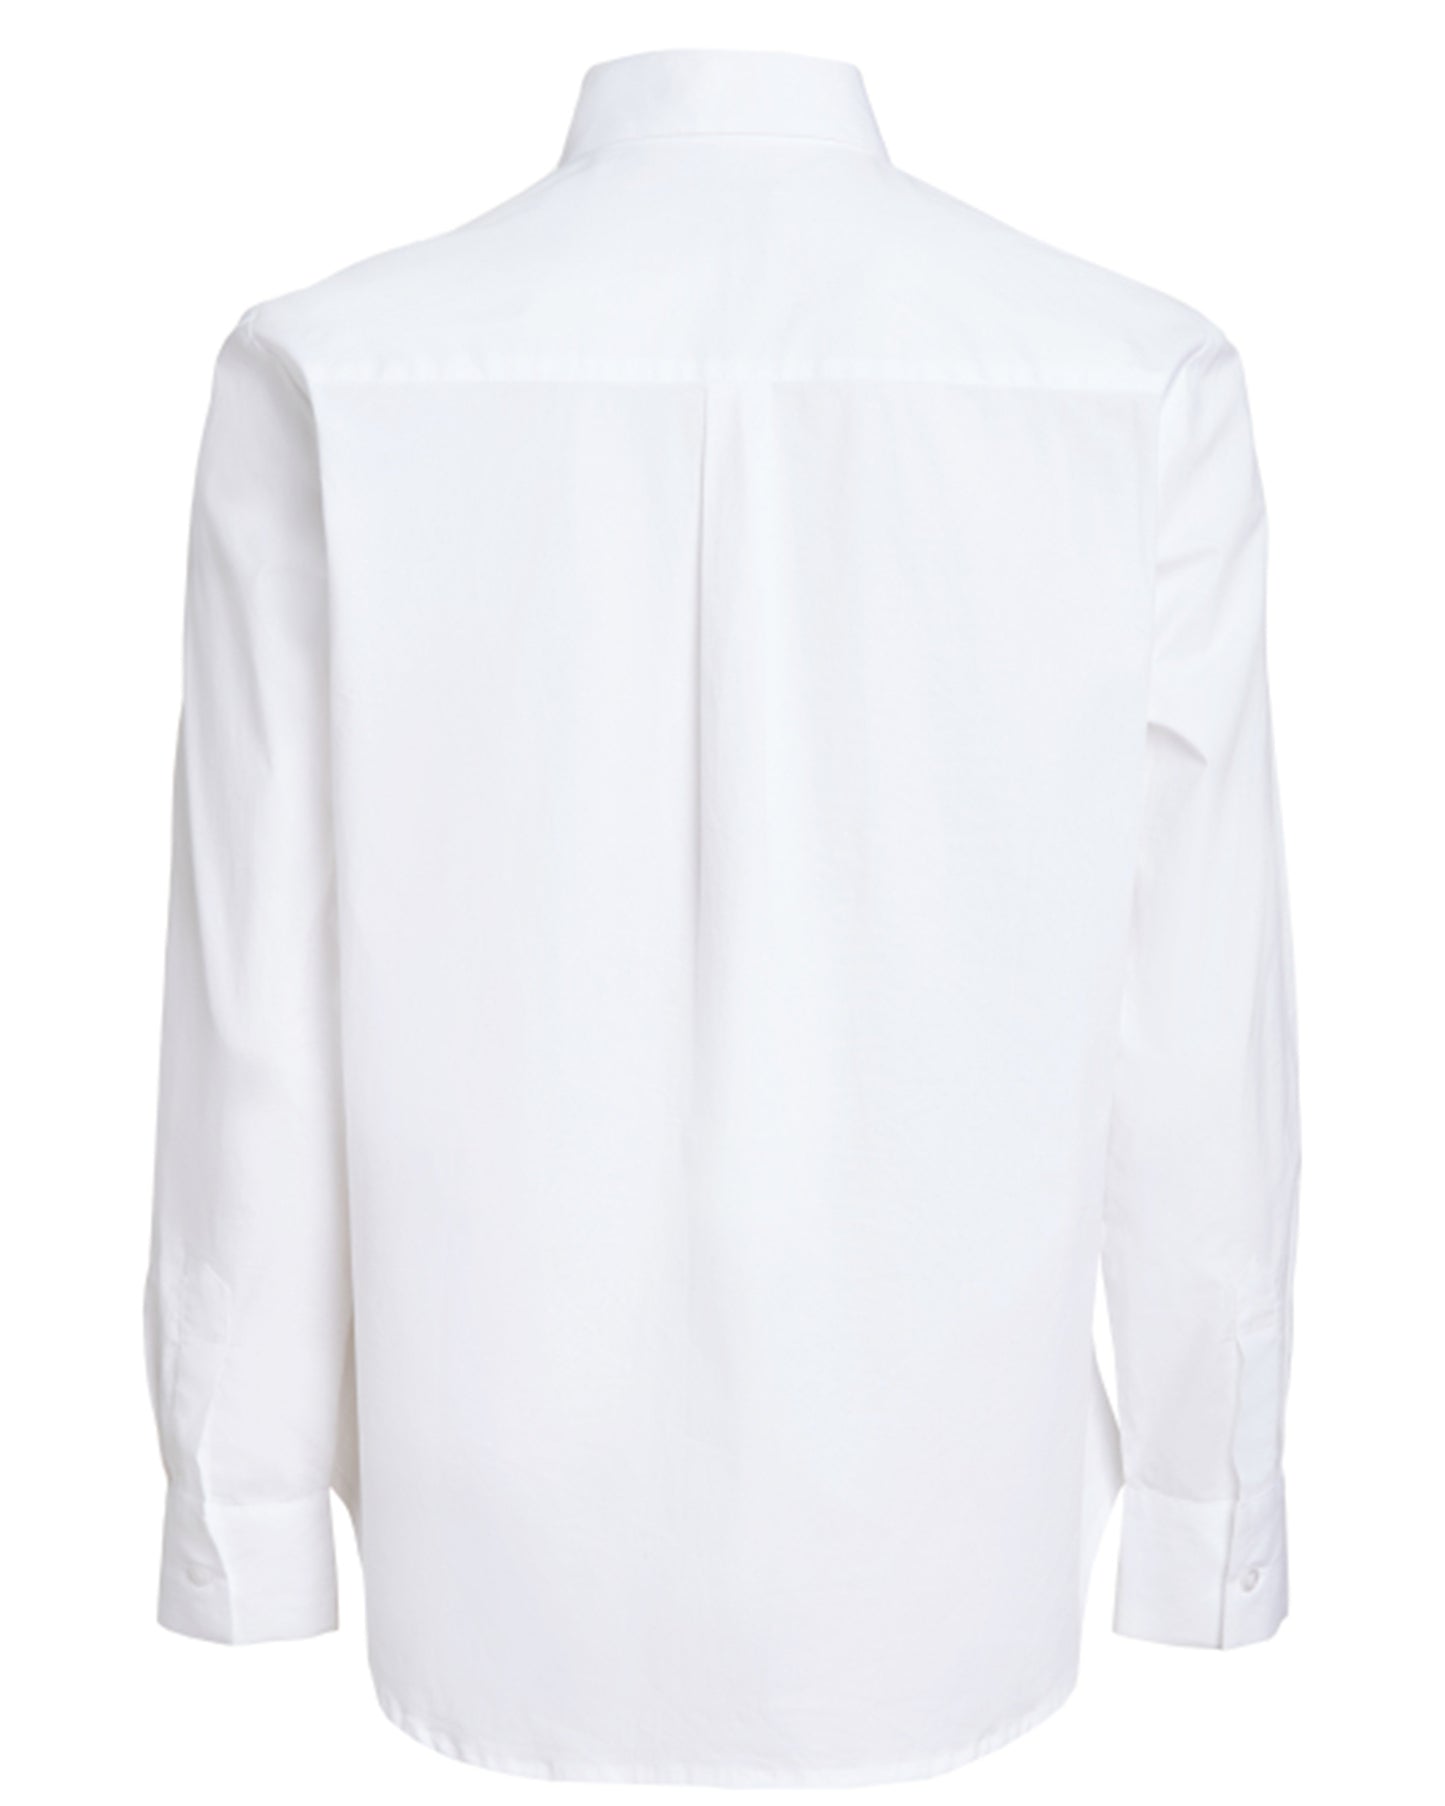 Back flat lay of White organic cotton long sleeve button down